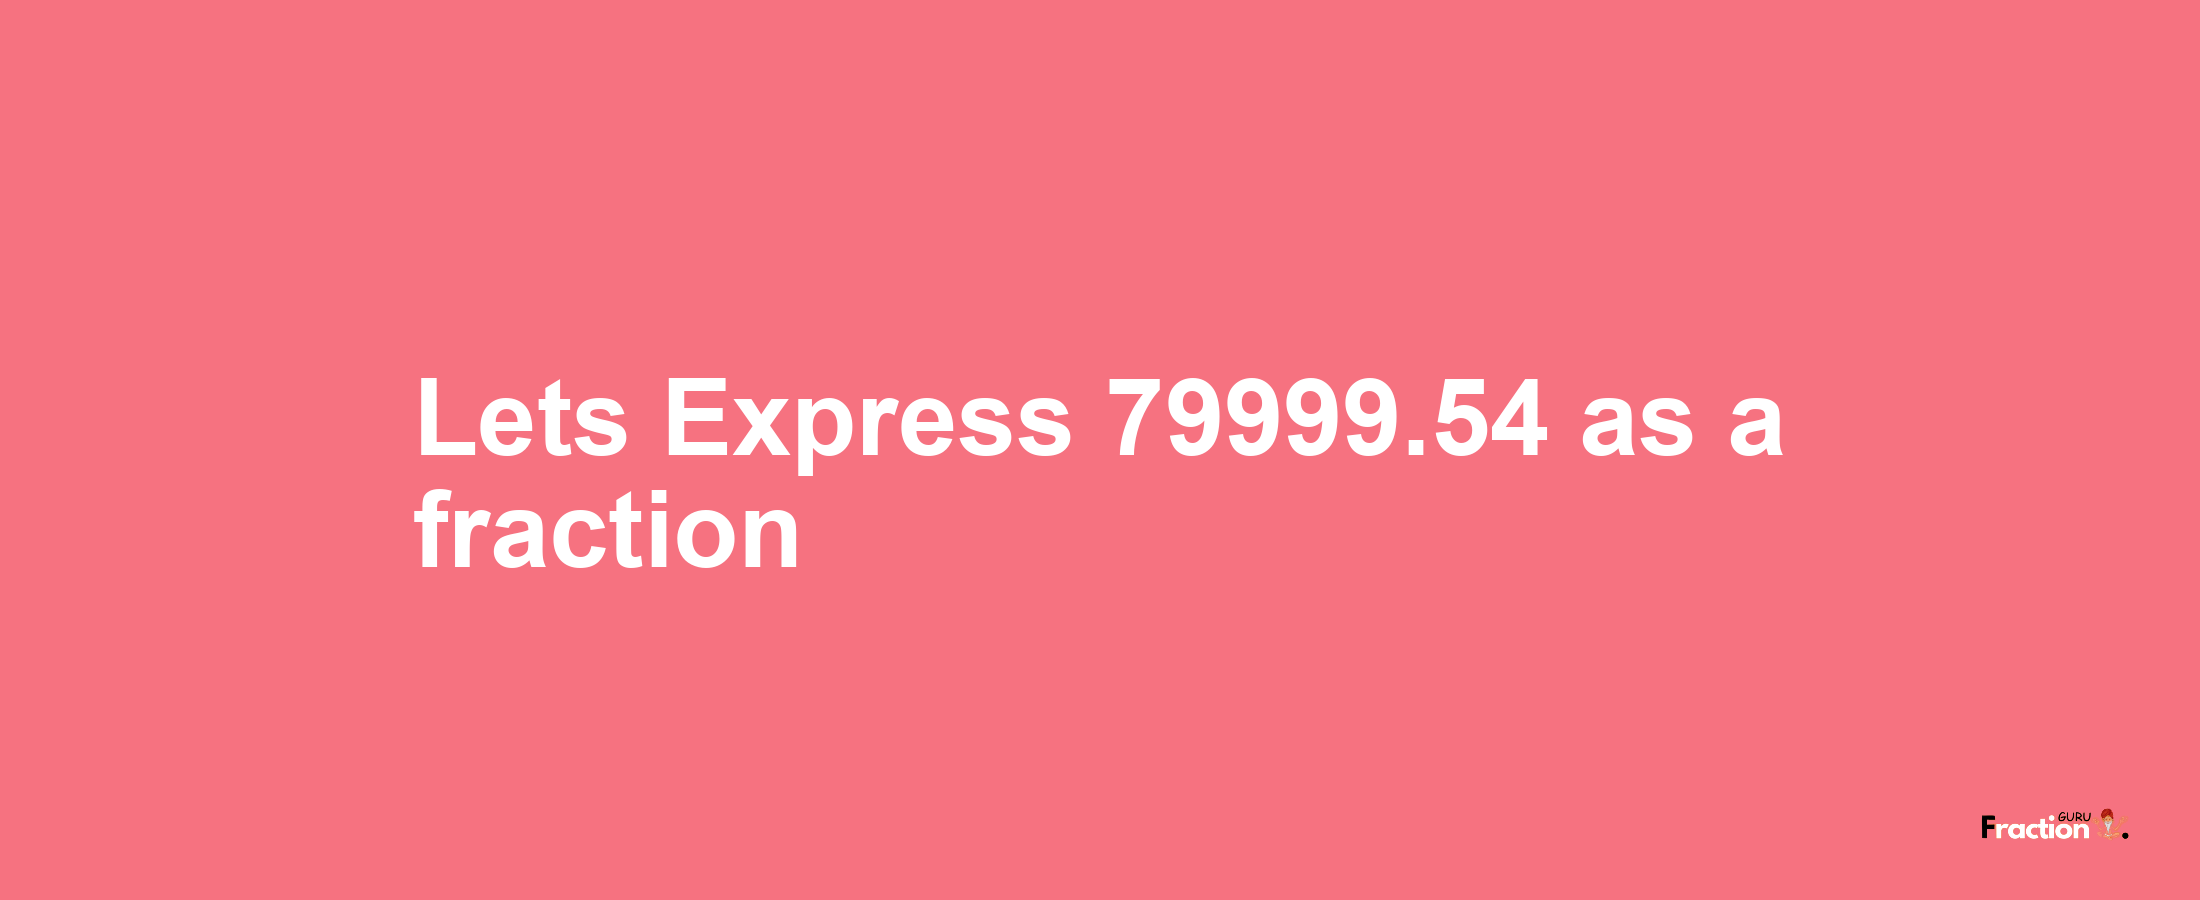 Lets Express 79999.54 as afraction